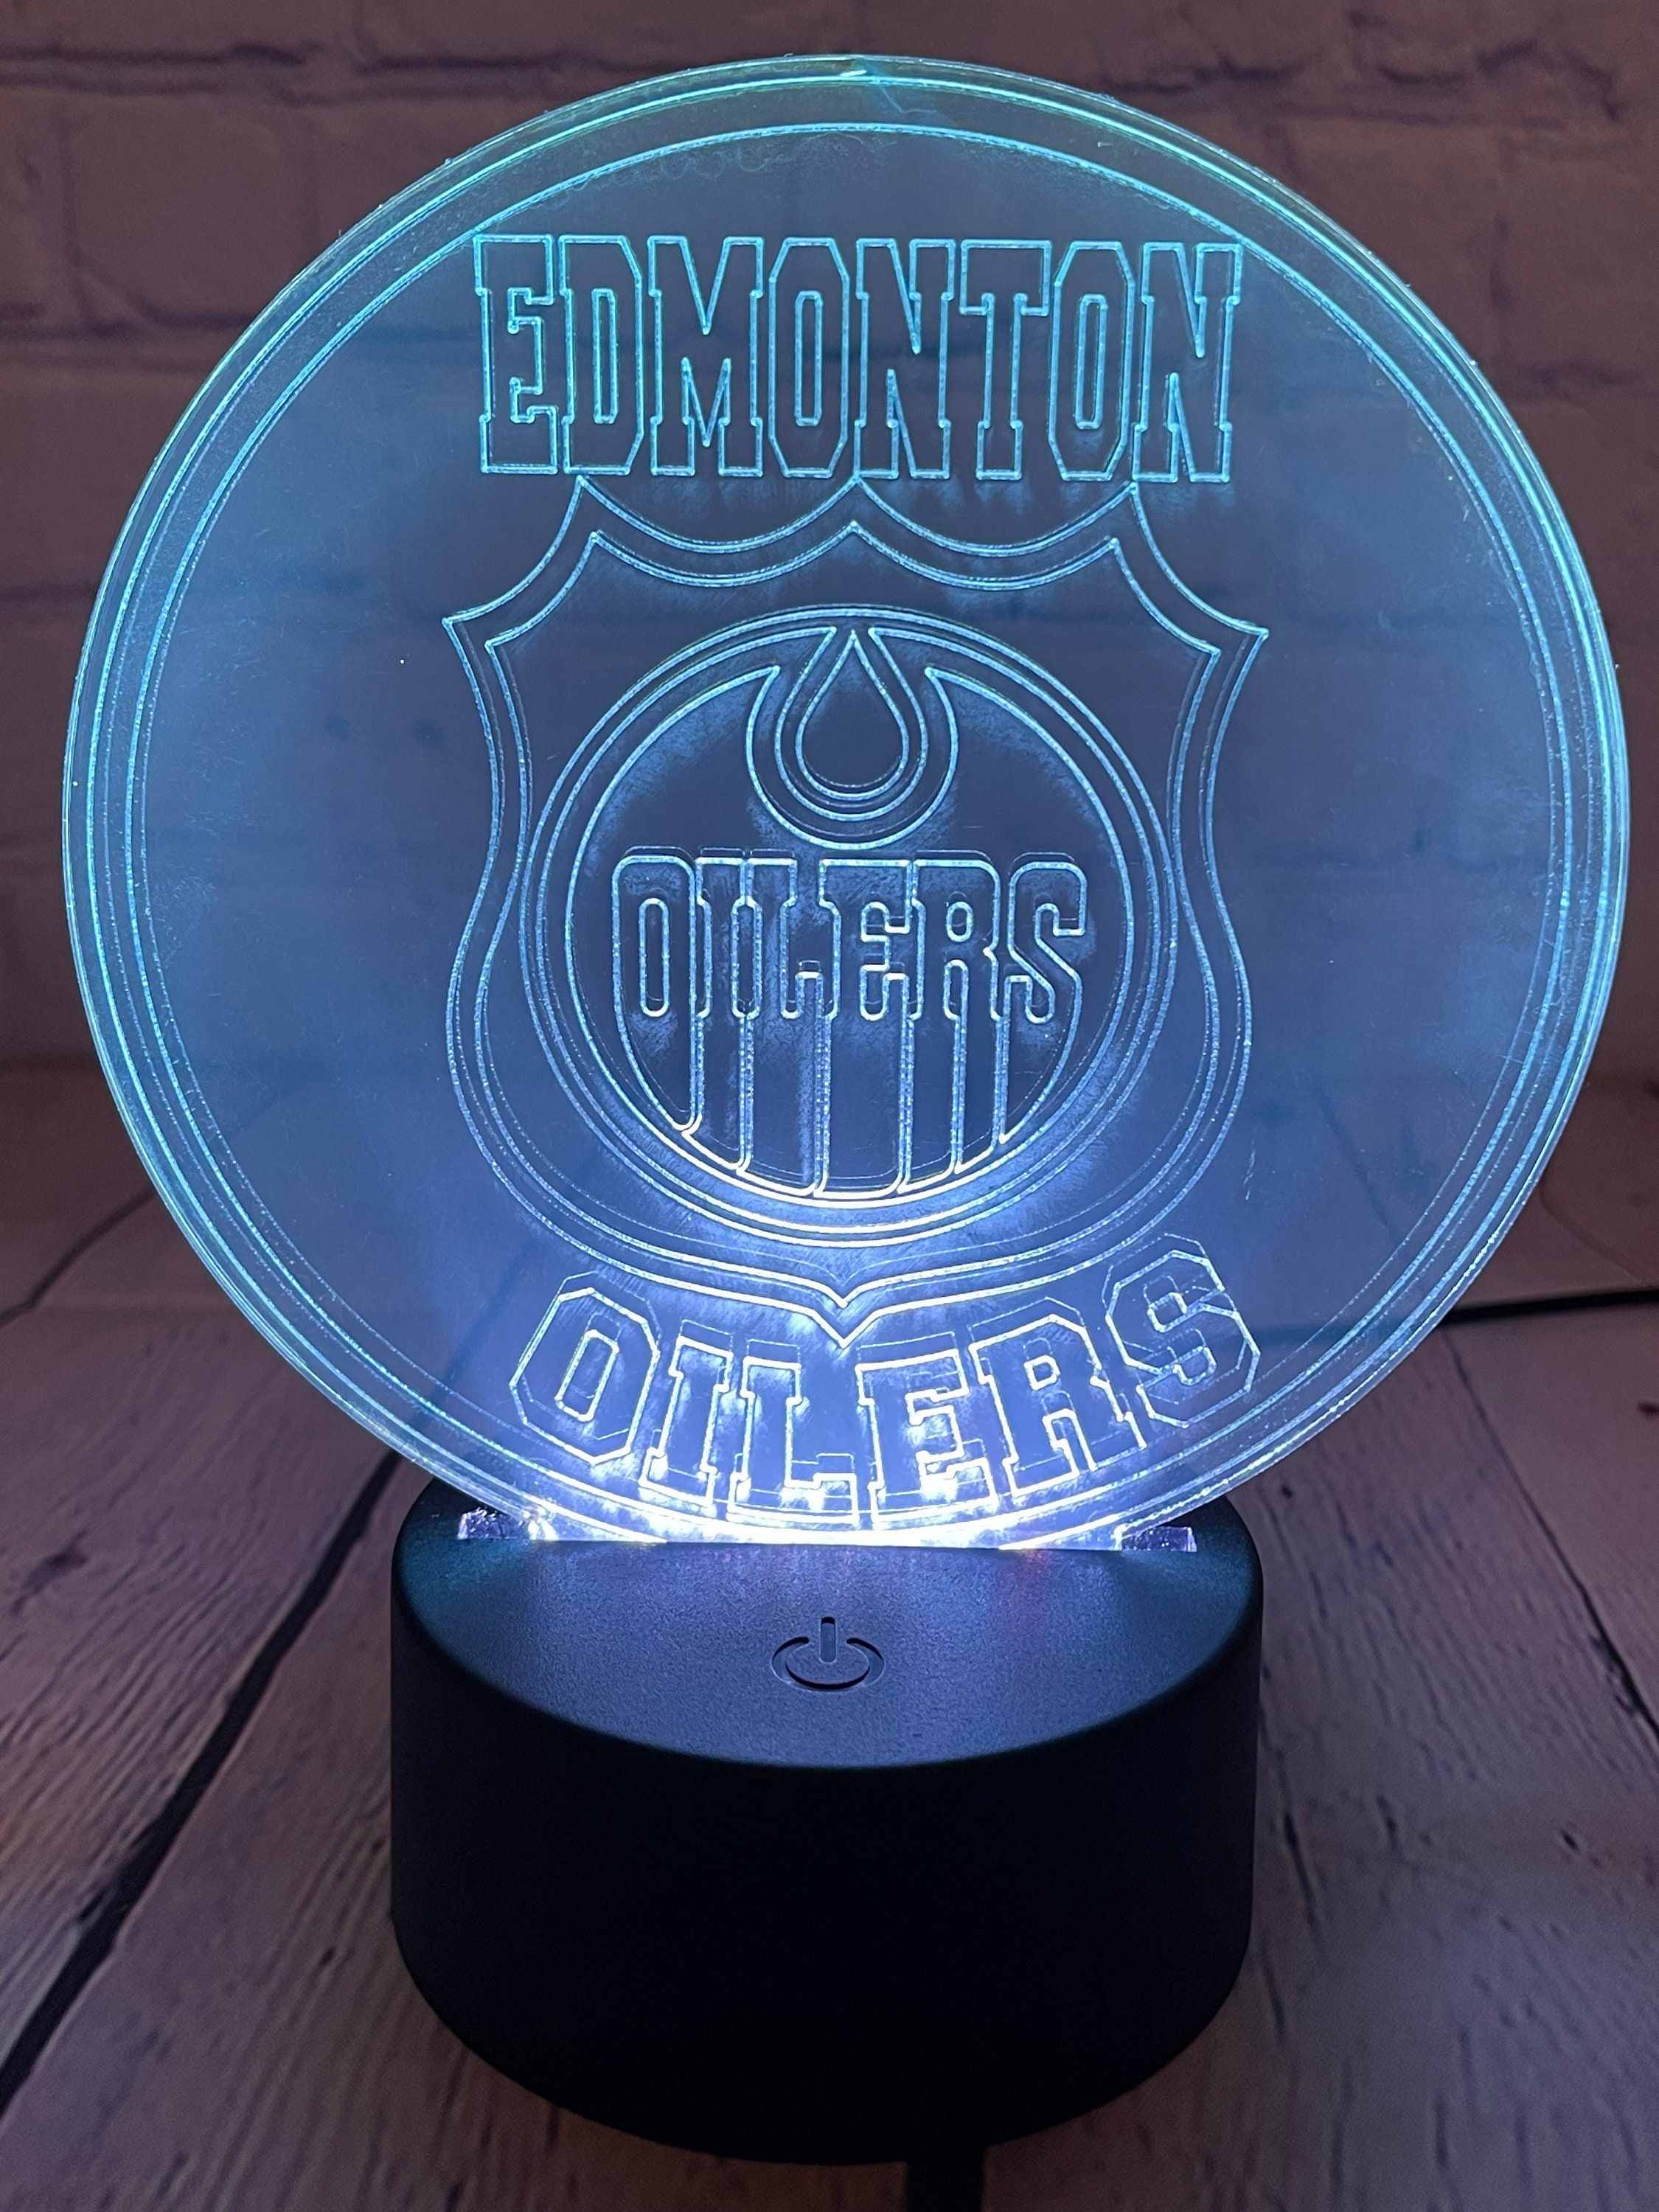 Custom Name Edmonton Oilers Shirt 3D Cool Mascot Oilers Gift Ideas -  Personalized Gifts: Family, Sports, Occasions, Trending